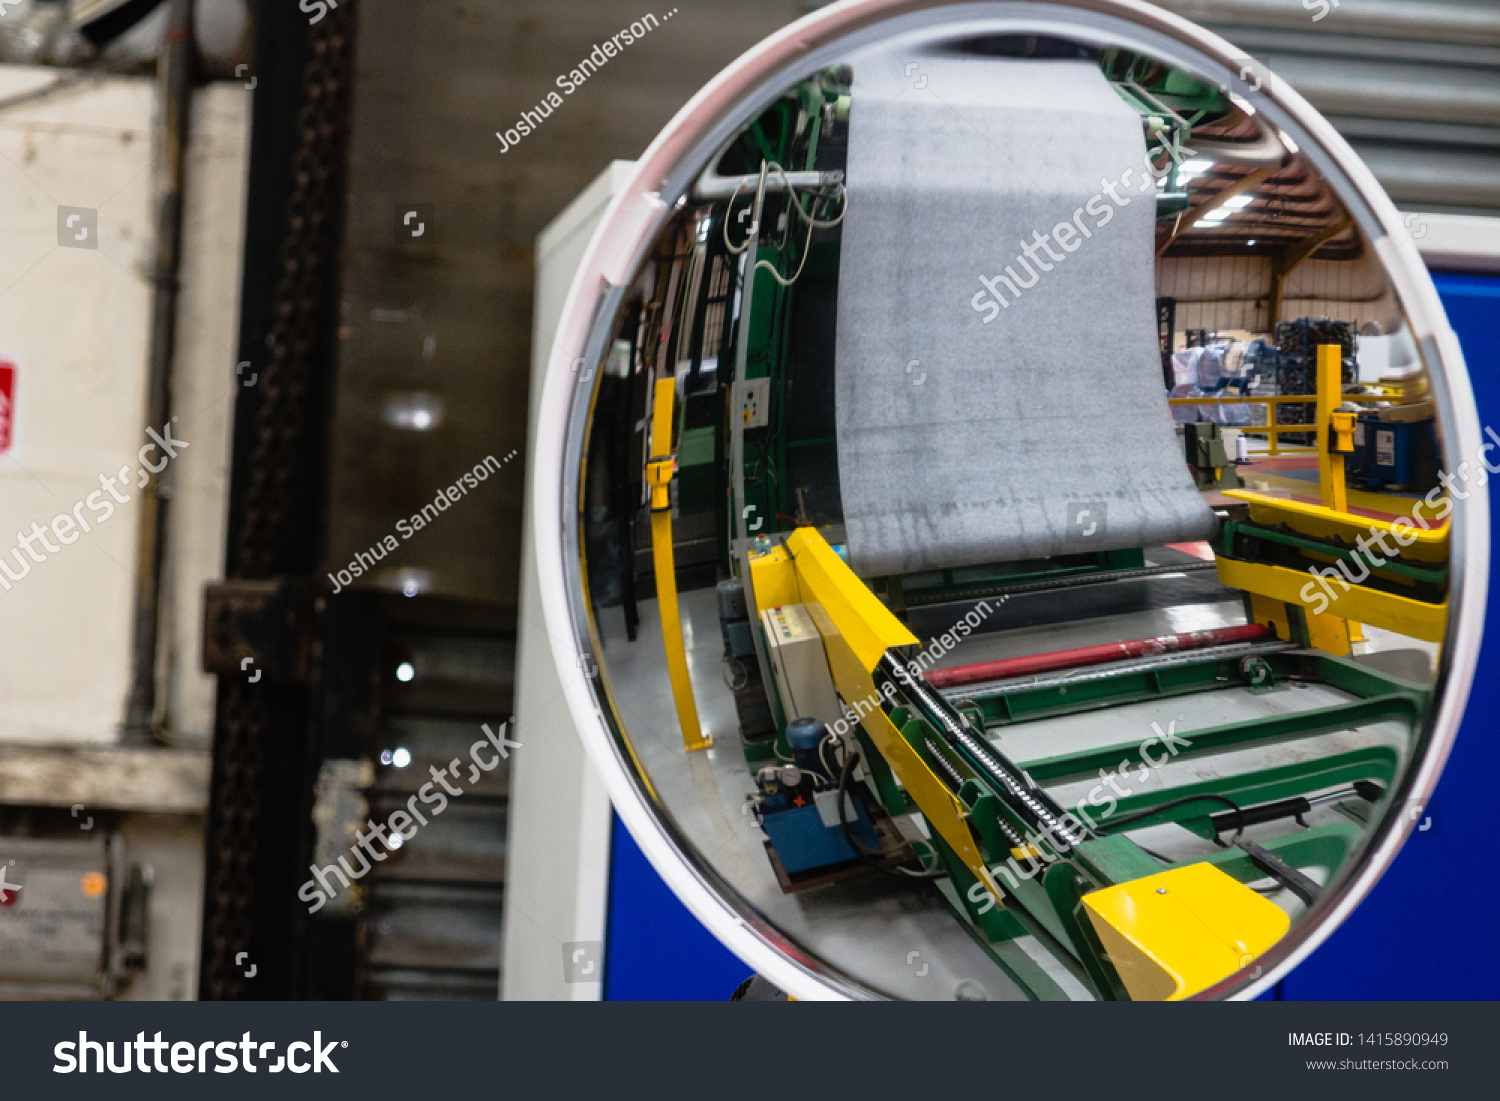 Curved circular mirror reflecting the inside of a factory for industry and production with bright reds, yellow, curved skylight reflection with photographer in the reflection worker health and safety #1415890949